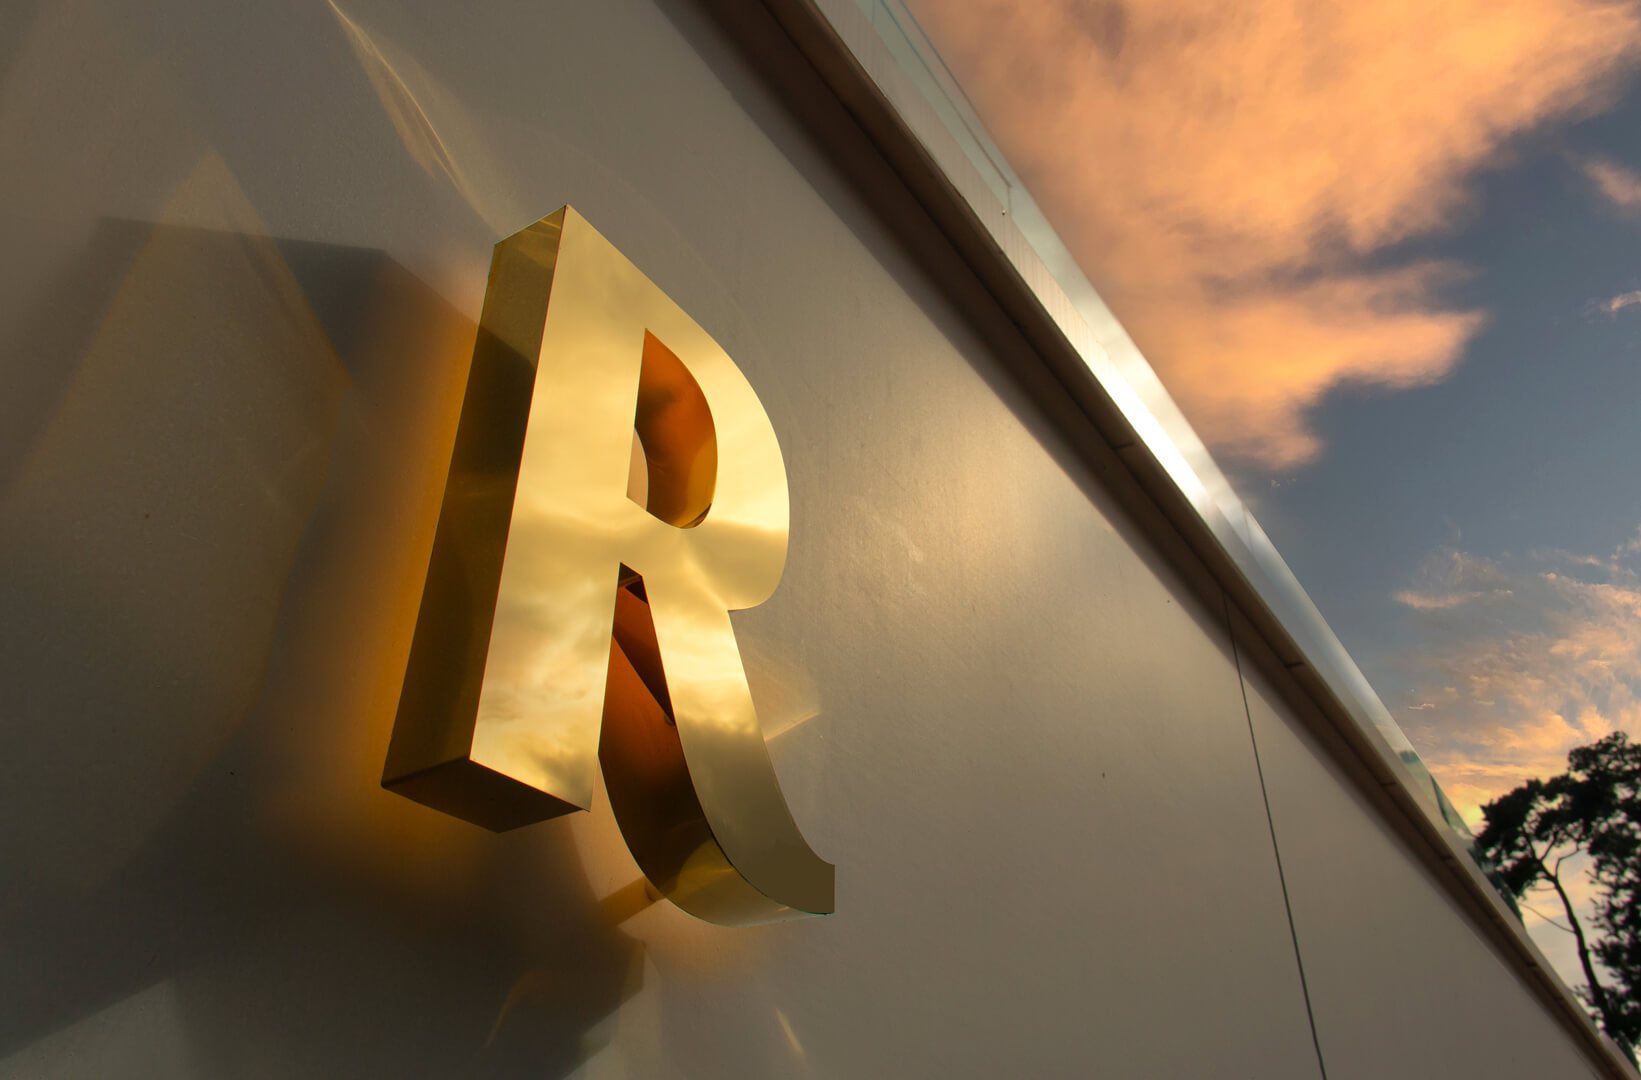 letters made of gold polished stainless steel, back-lit on the wall